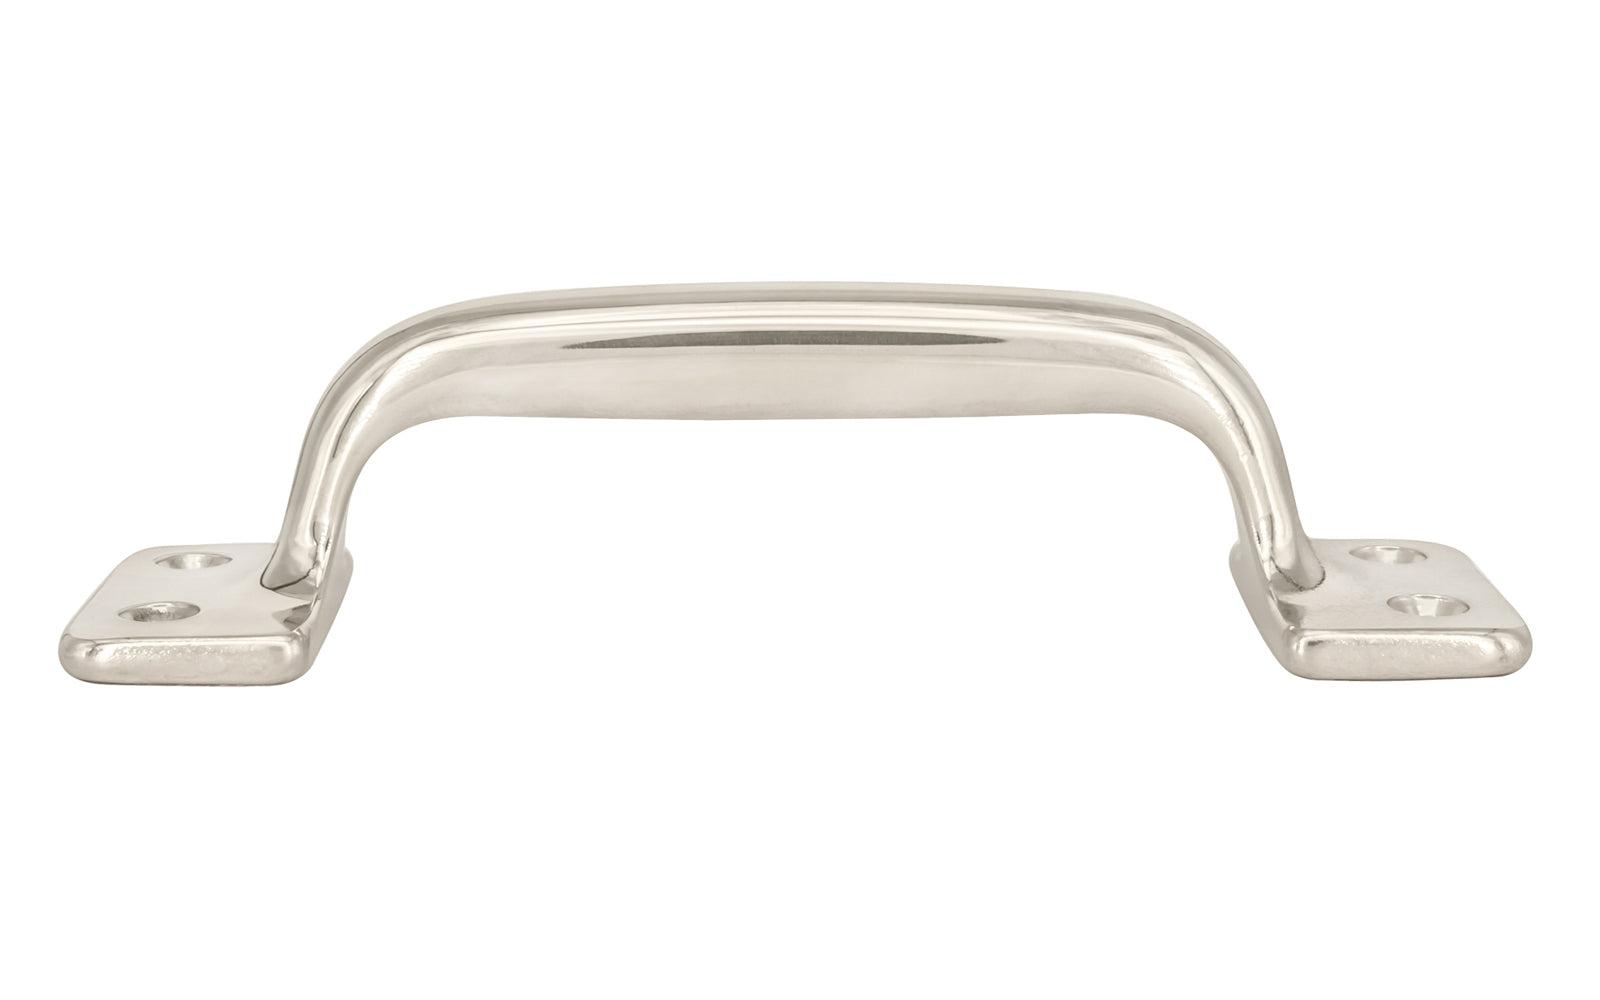 Vintage-style Hardware · Classic Solid Brass Handle Pull ~ 4-3/8" On Centers. Versatile handle is great for sash windows, cabinets, drawers, file cabinets. Arts & Crafts handle pull. Polished Nickel Finish.